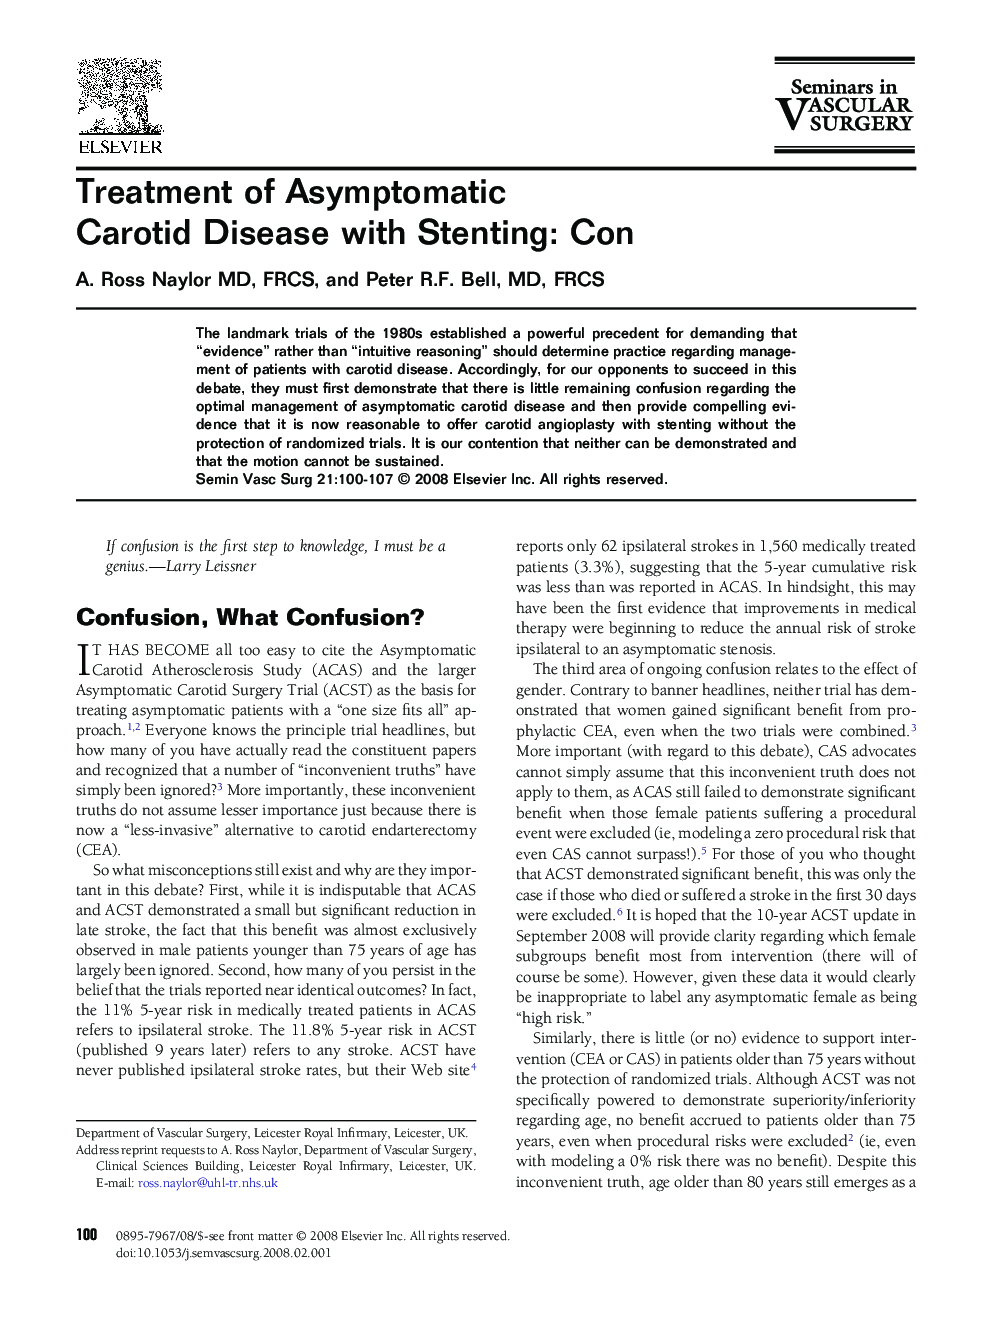 Treatment of Asymptomatic Carotid Disease with Stenting: Con